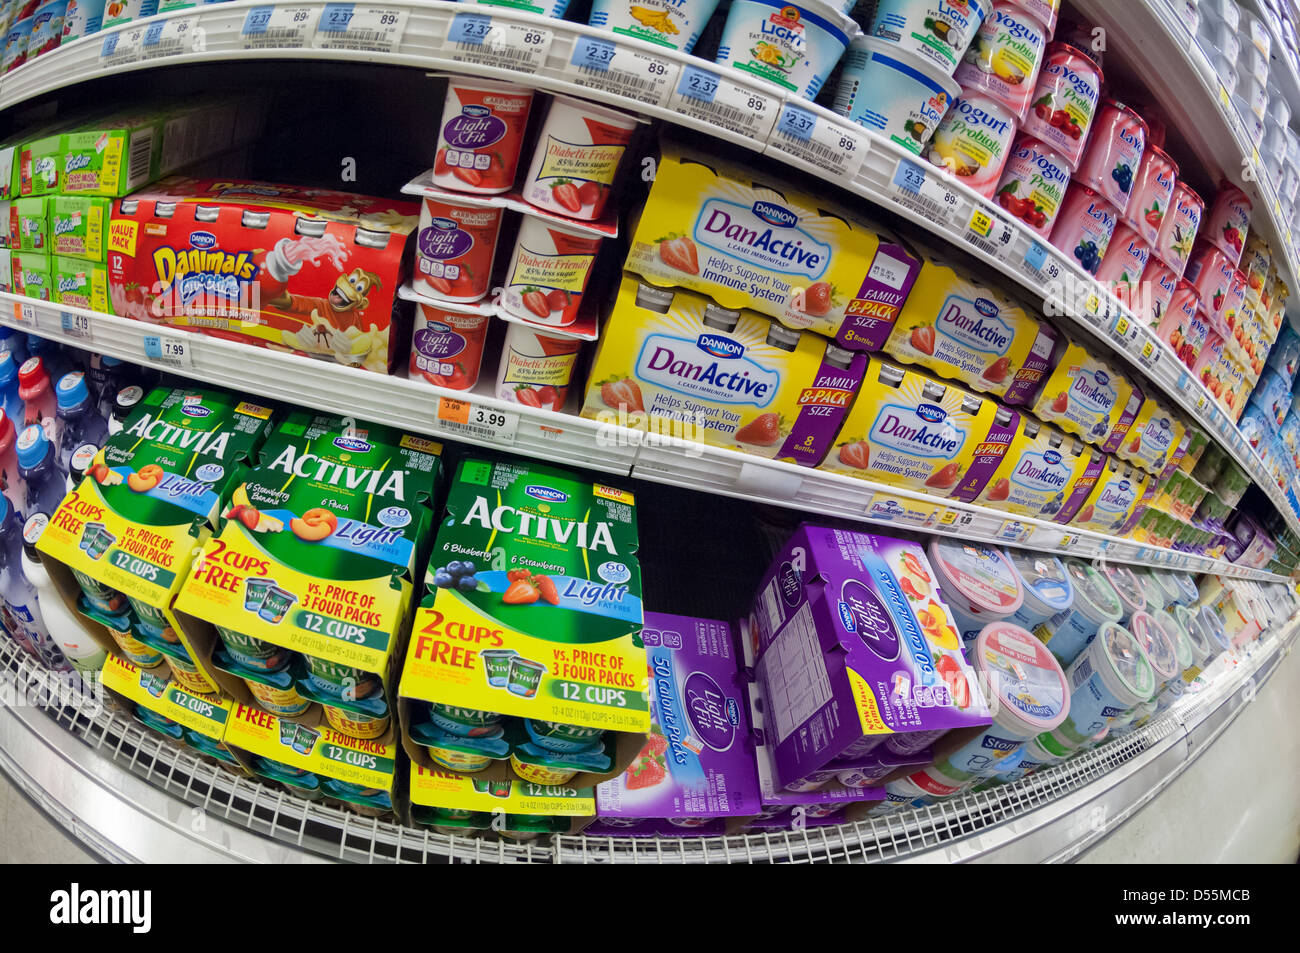 Containers of various brands of Dannon Yogurt are seen on a supermarket shelf on Thursday, March 21, 2013. (© Richard B. Levine) Stock Photo